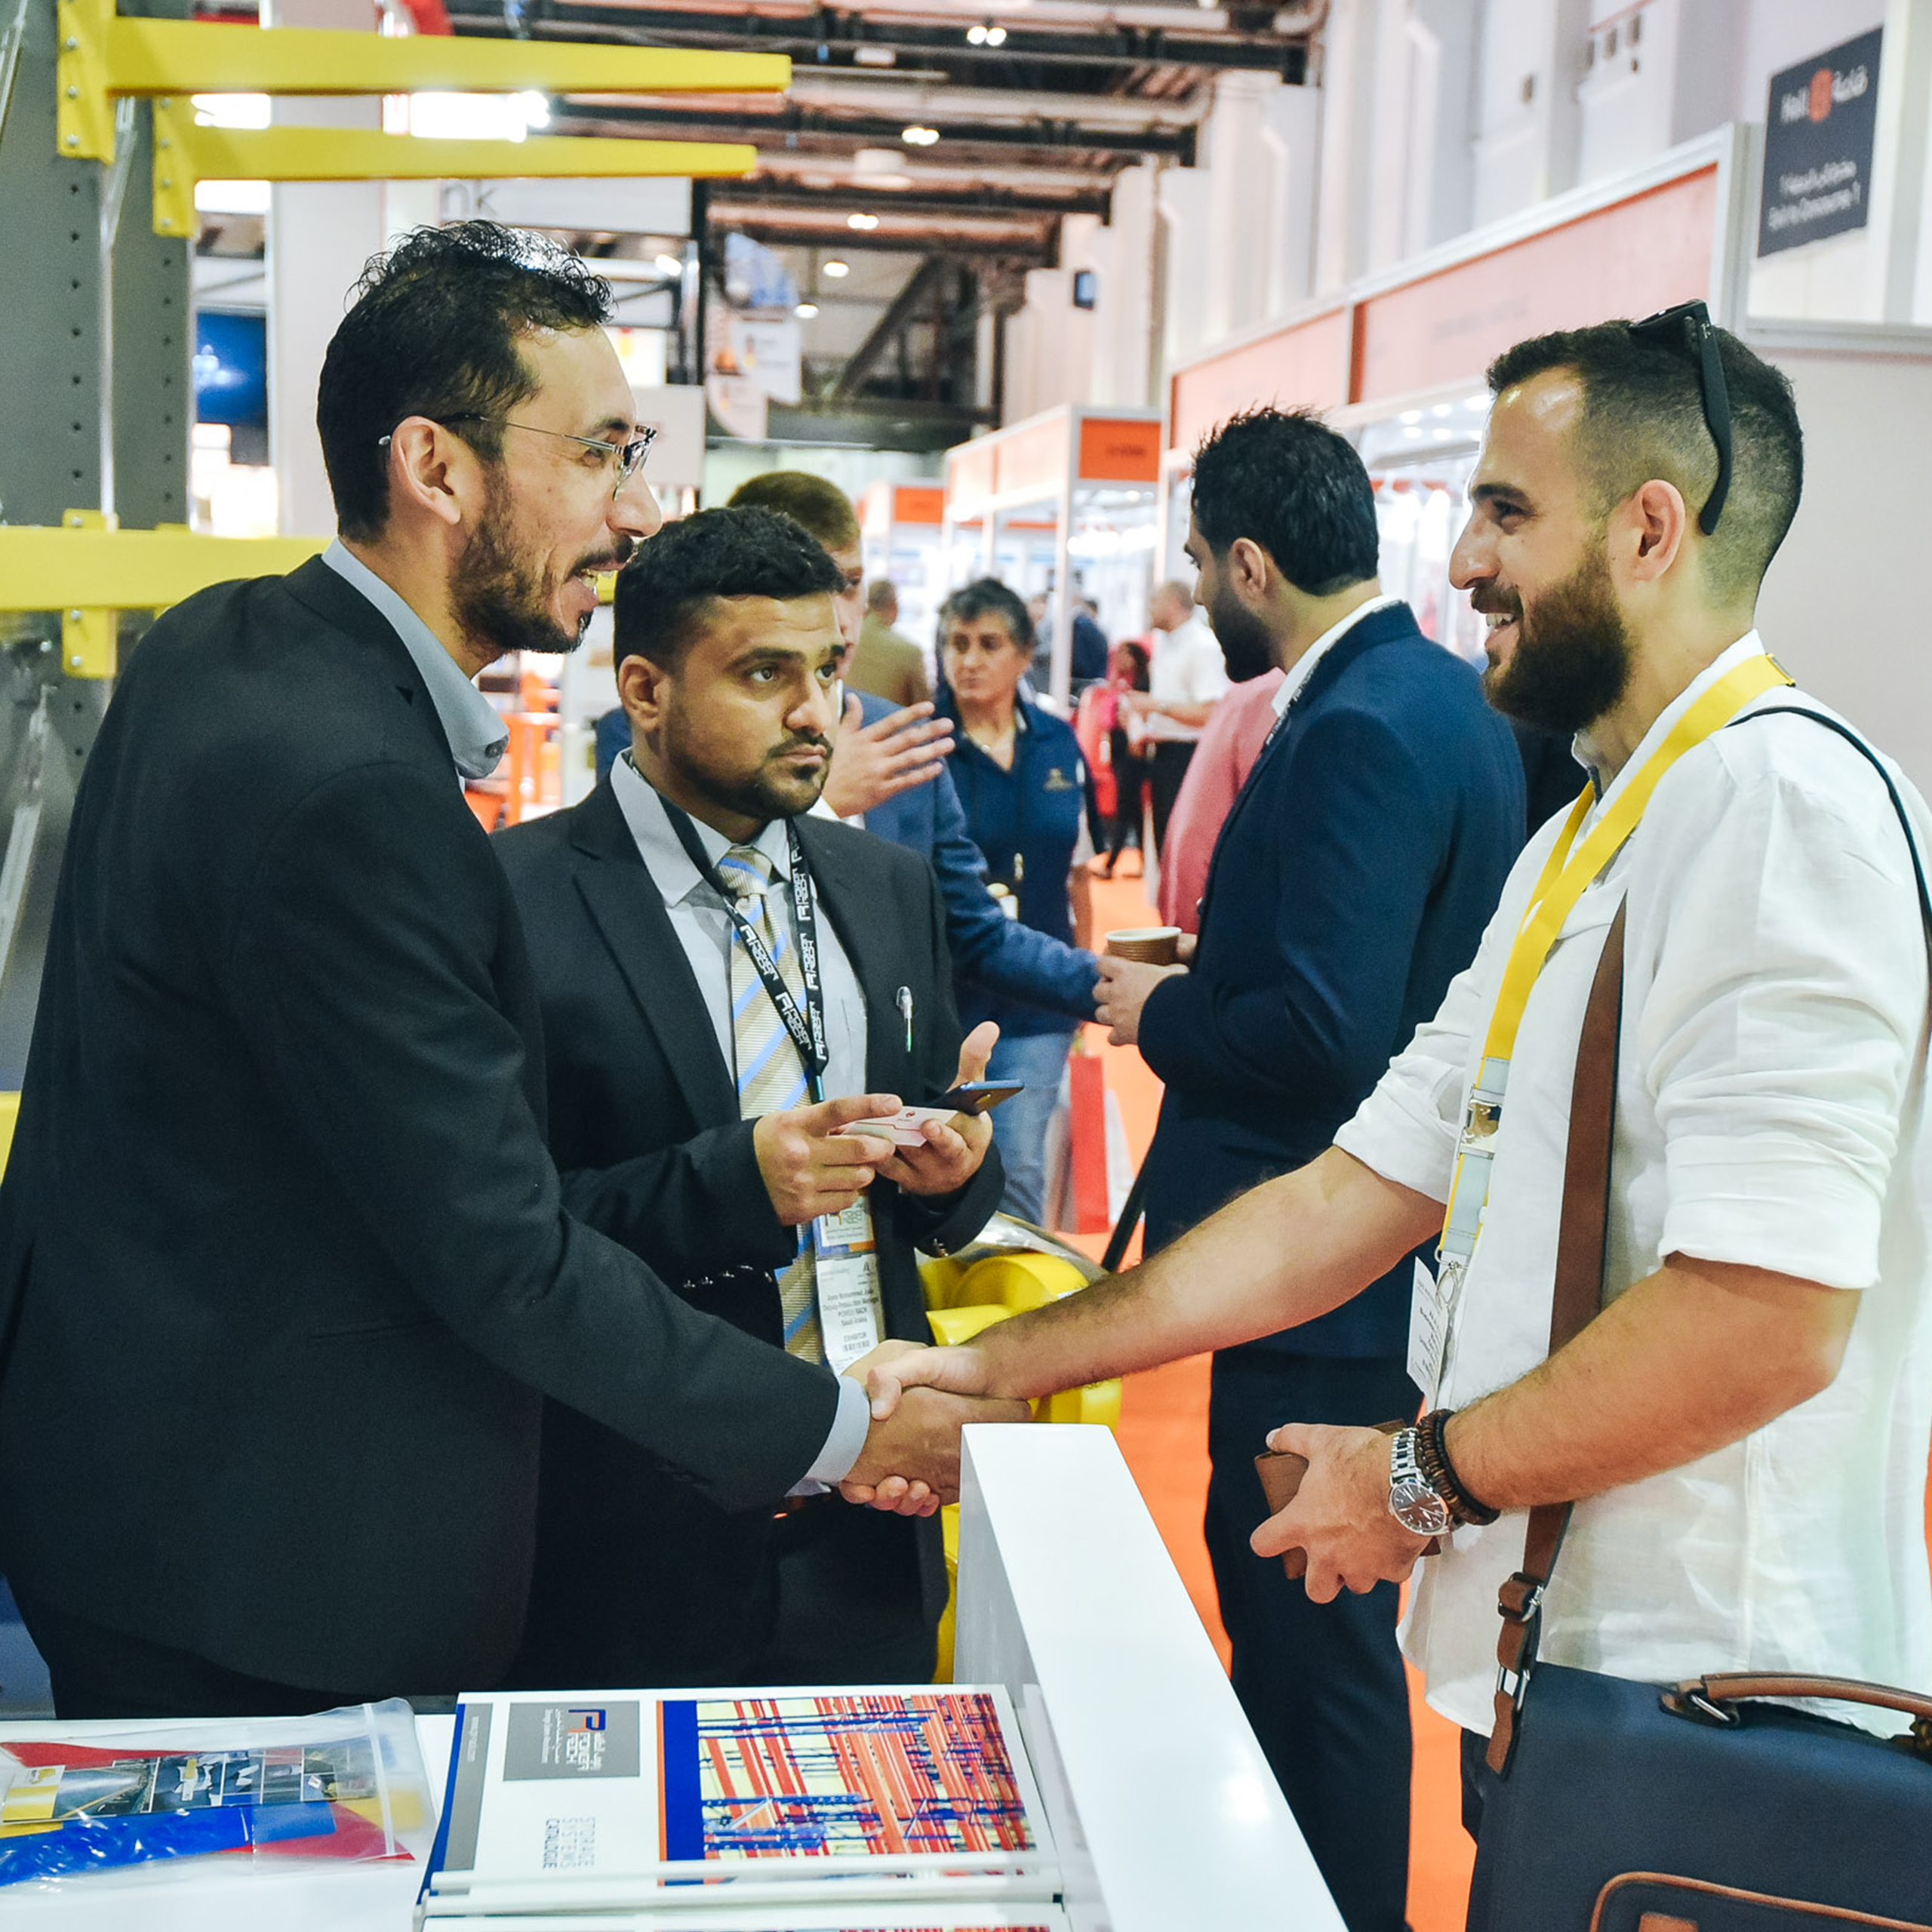 Materials Handling Middle East - Materials Handling Middle East 2019 racks up 12 percent yoy visitor growth for 10th edition